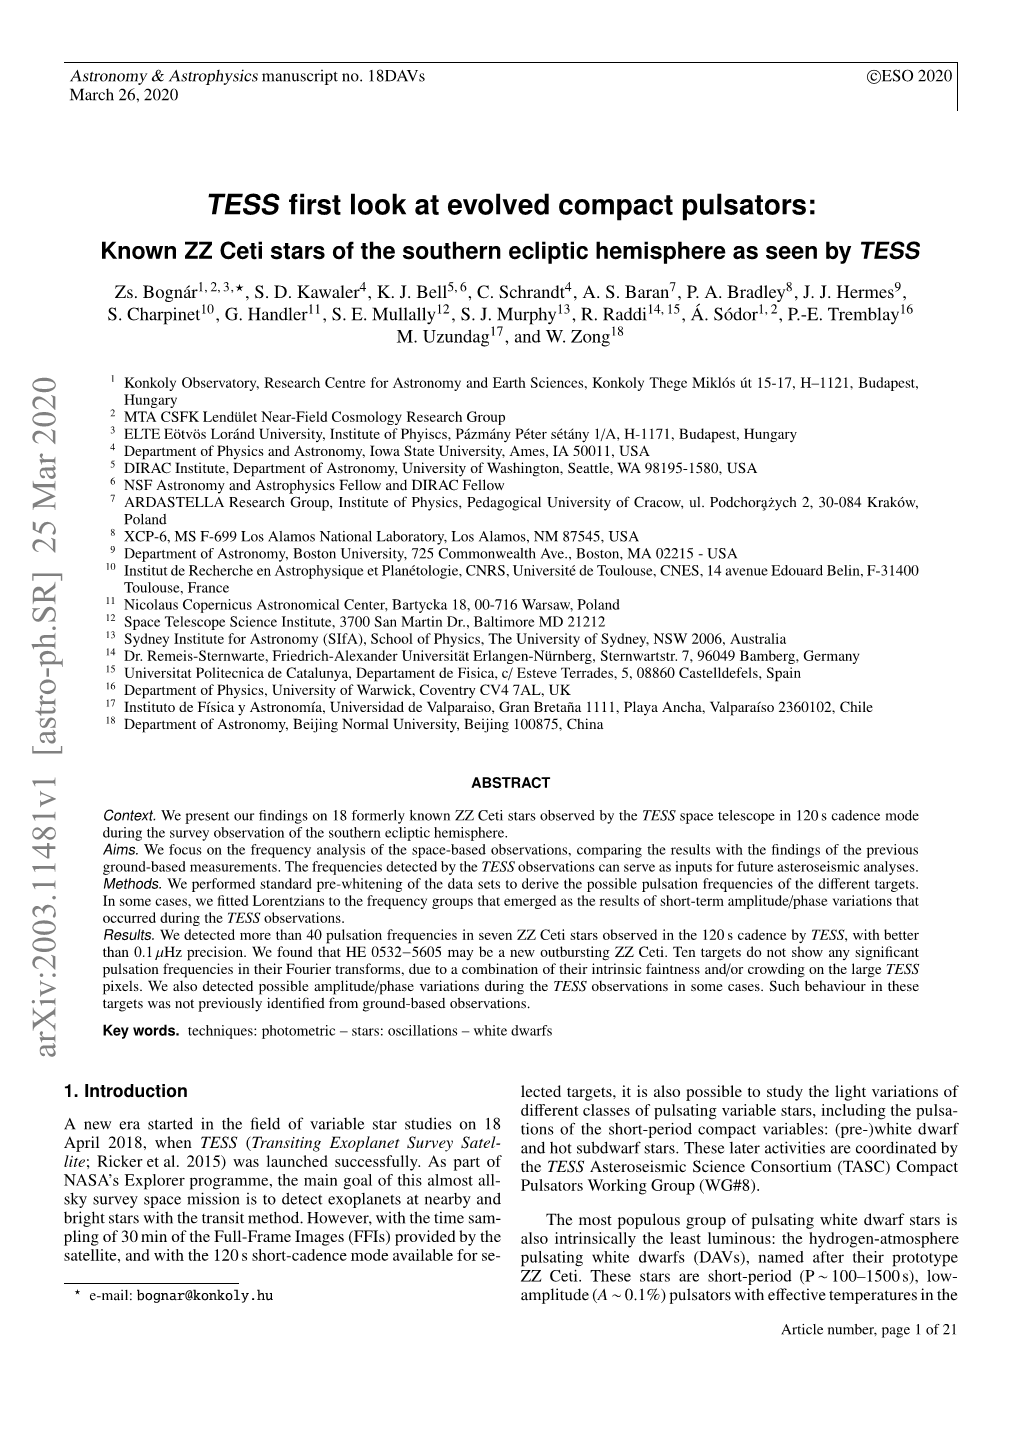 TESS First Look at Evolved Compact Pulsators: Known ZZ Ceti Stars Of